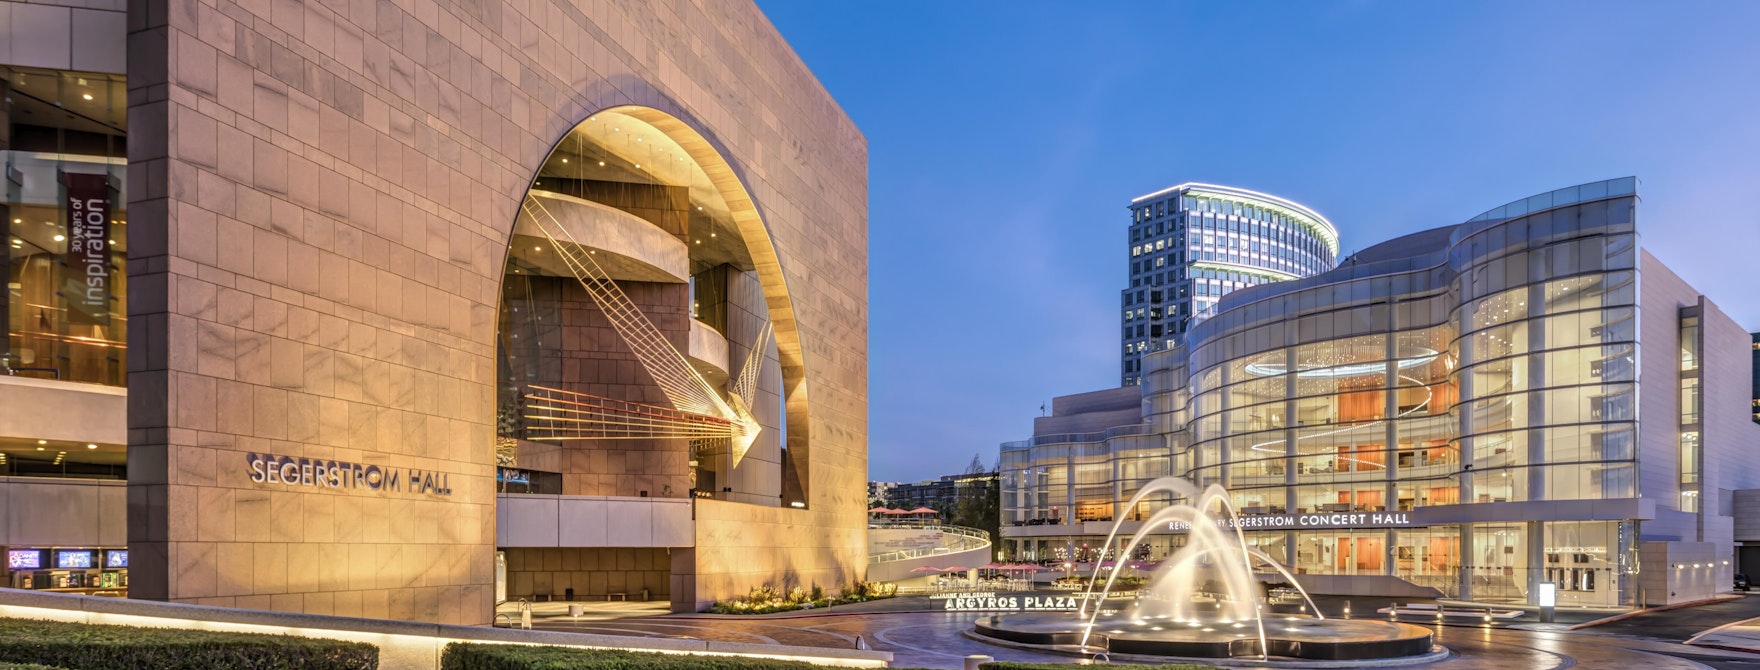 Segerstrom Center For the Arts campus at night